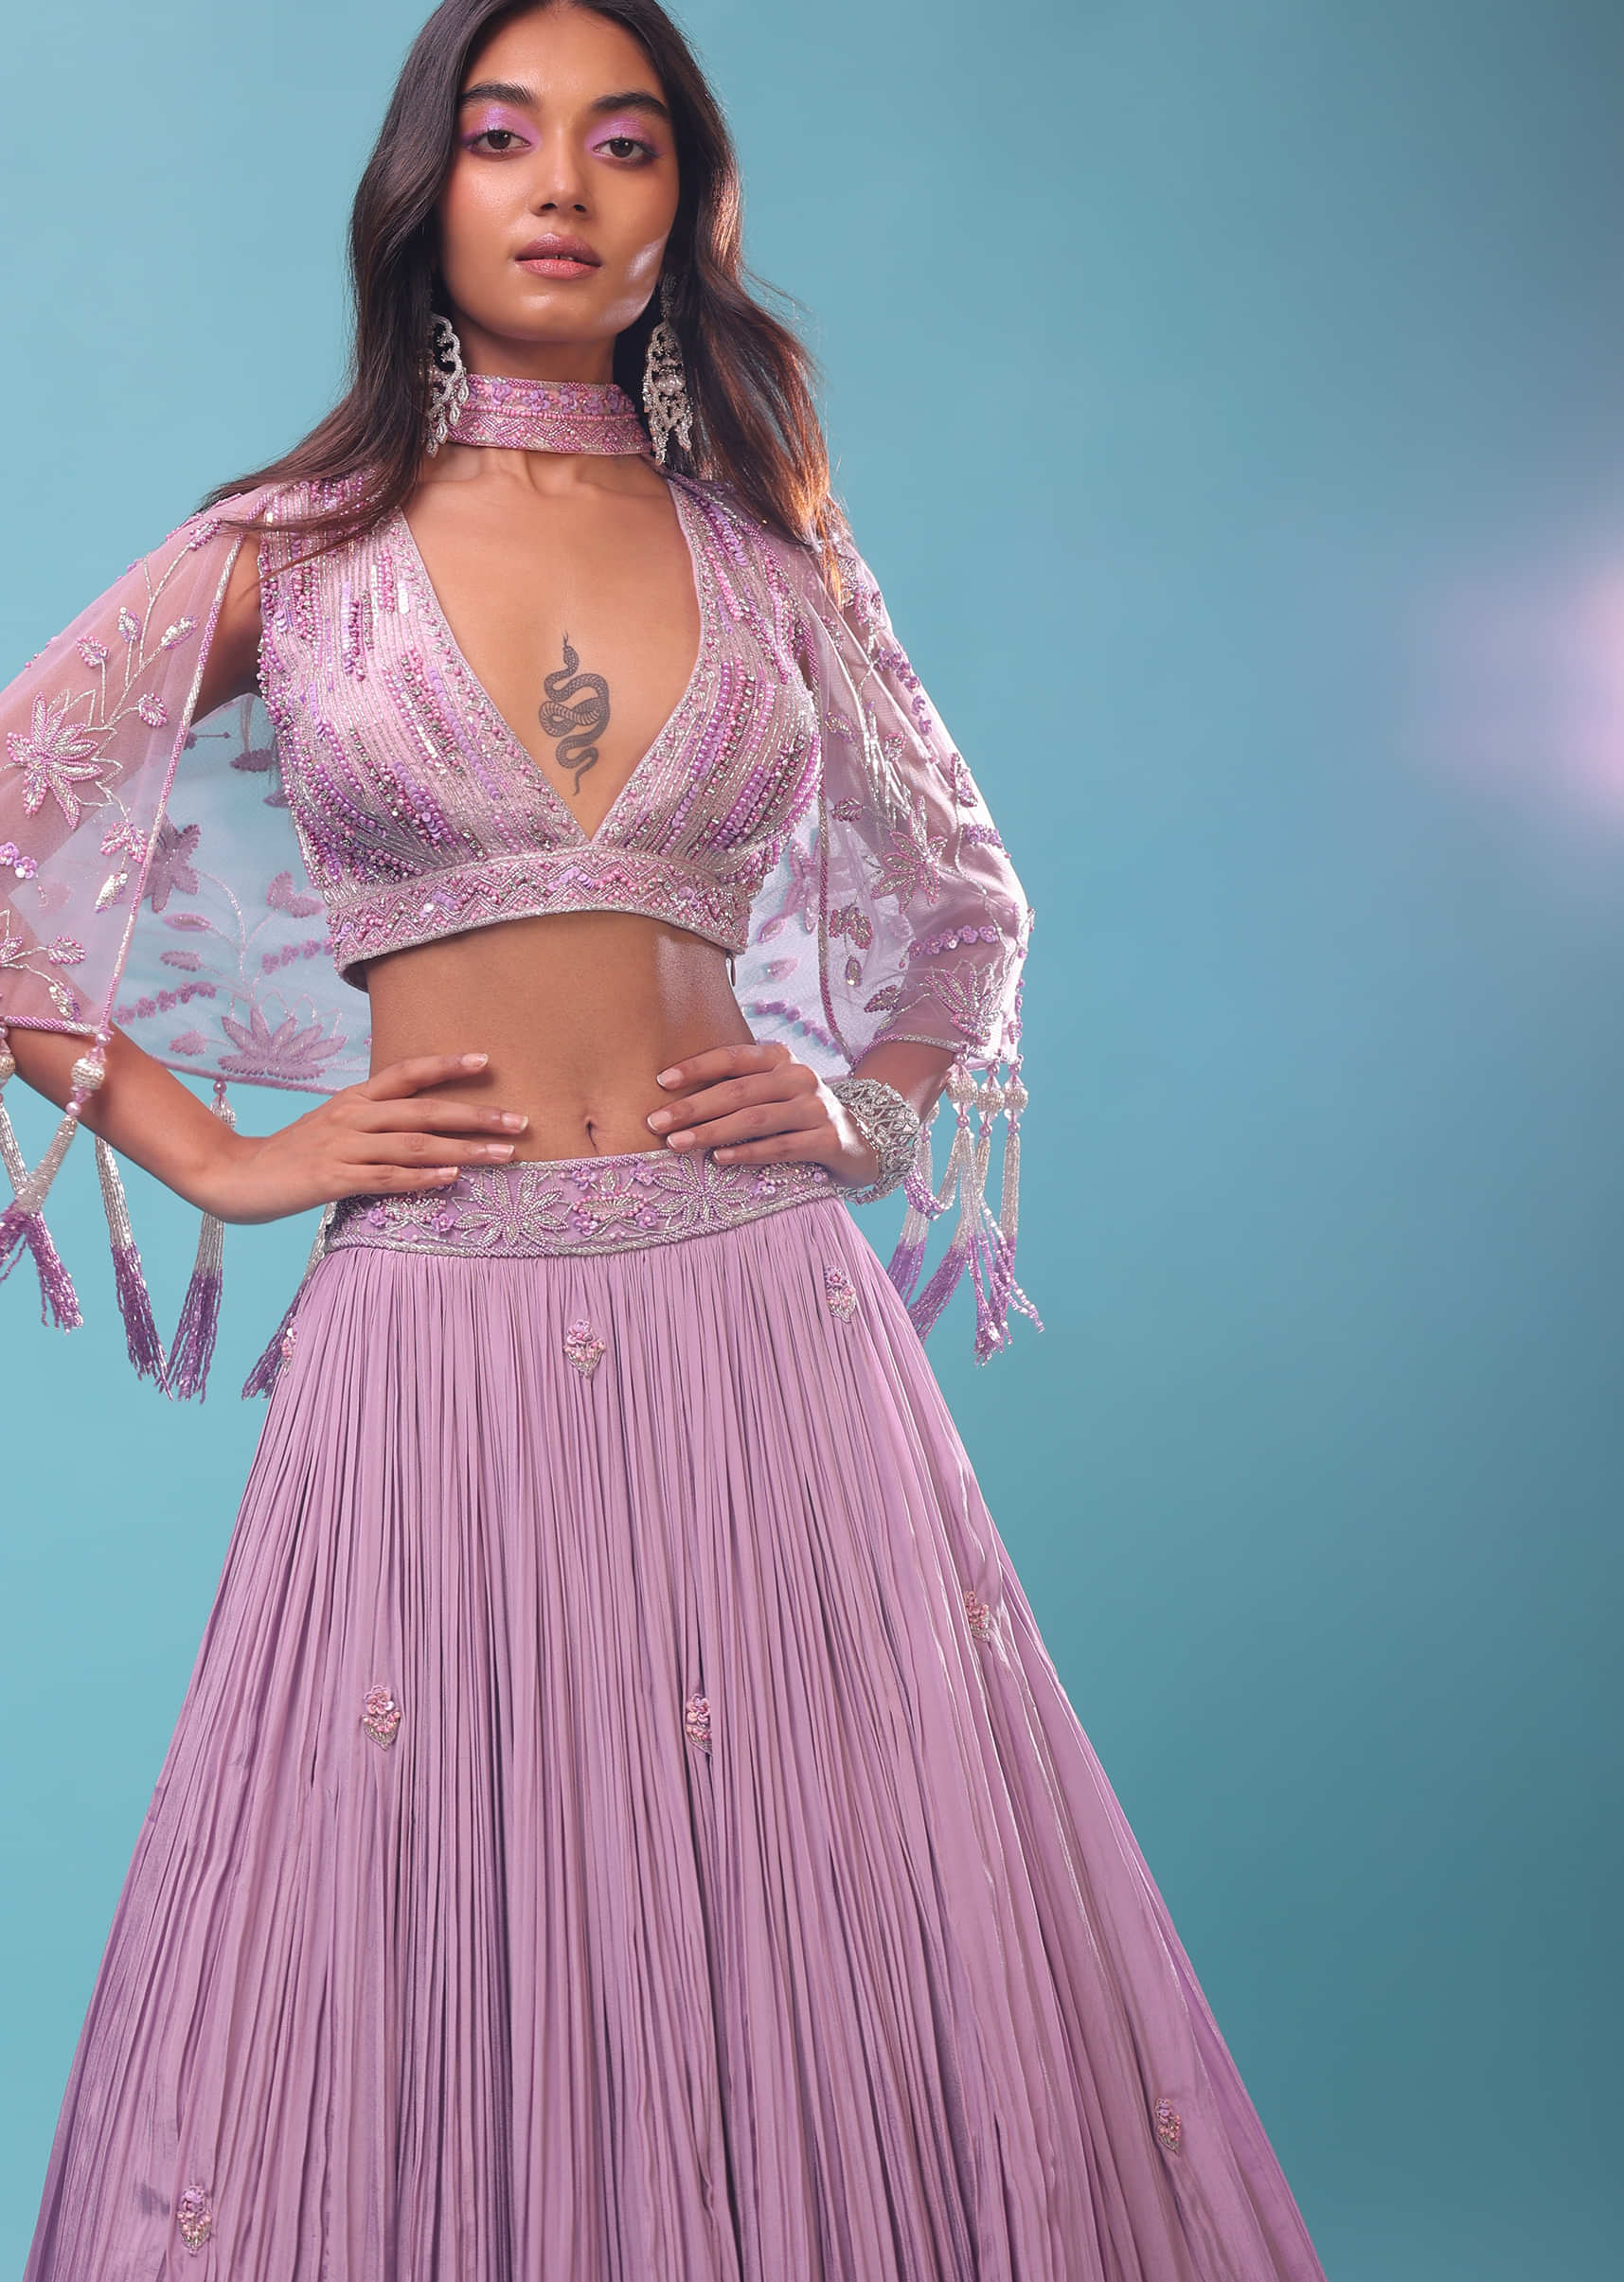 Ombre Lehenga And Crop Top In Moti Cut An Dana Embroidery, Cape Jacket In Tassels Fringes At The Border